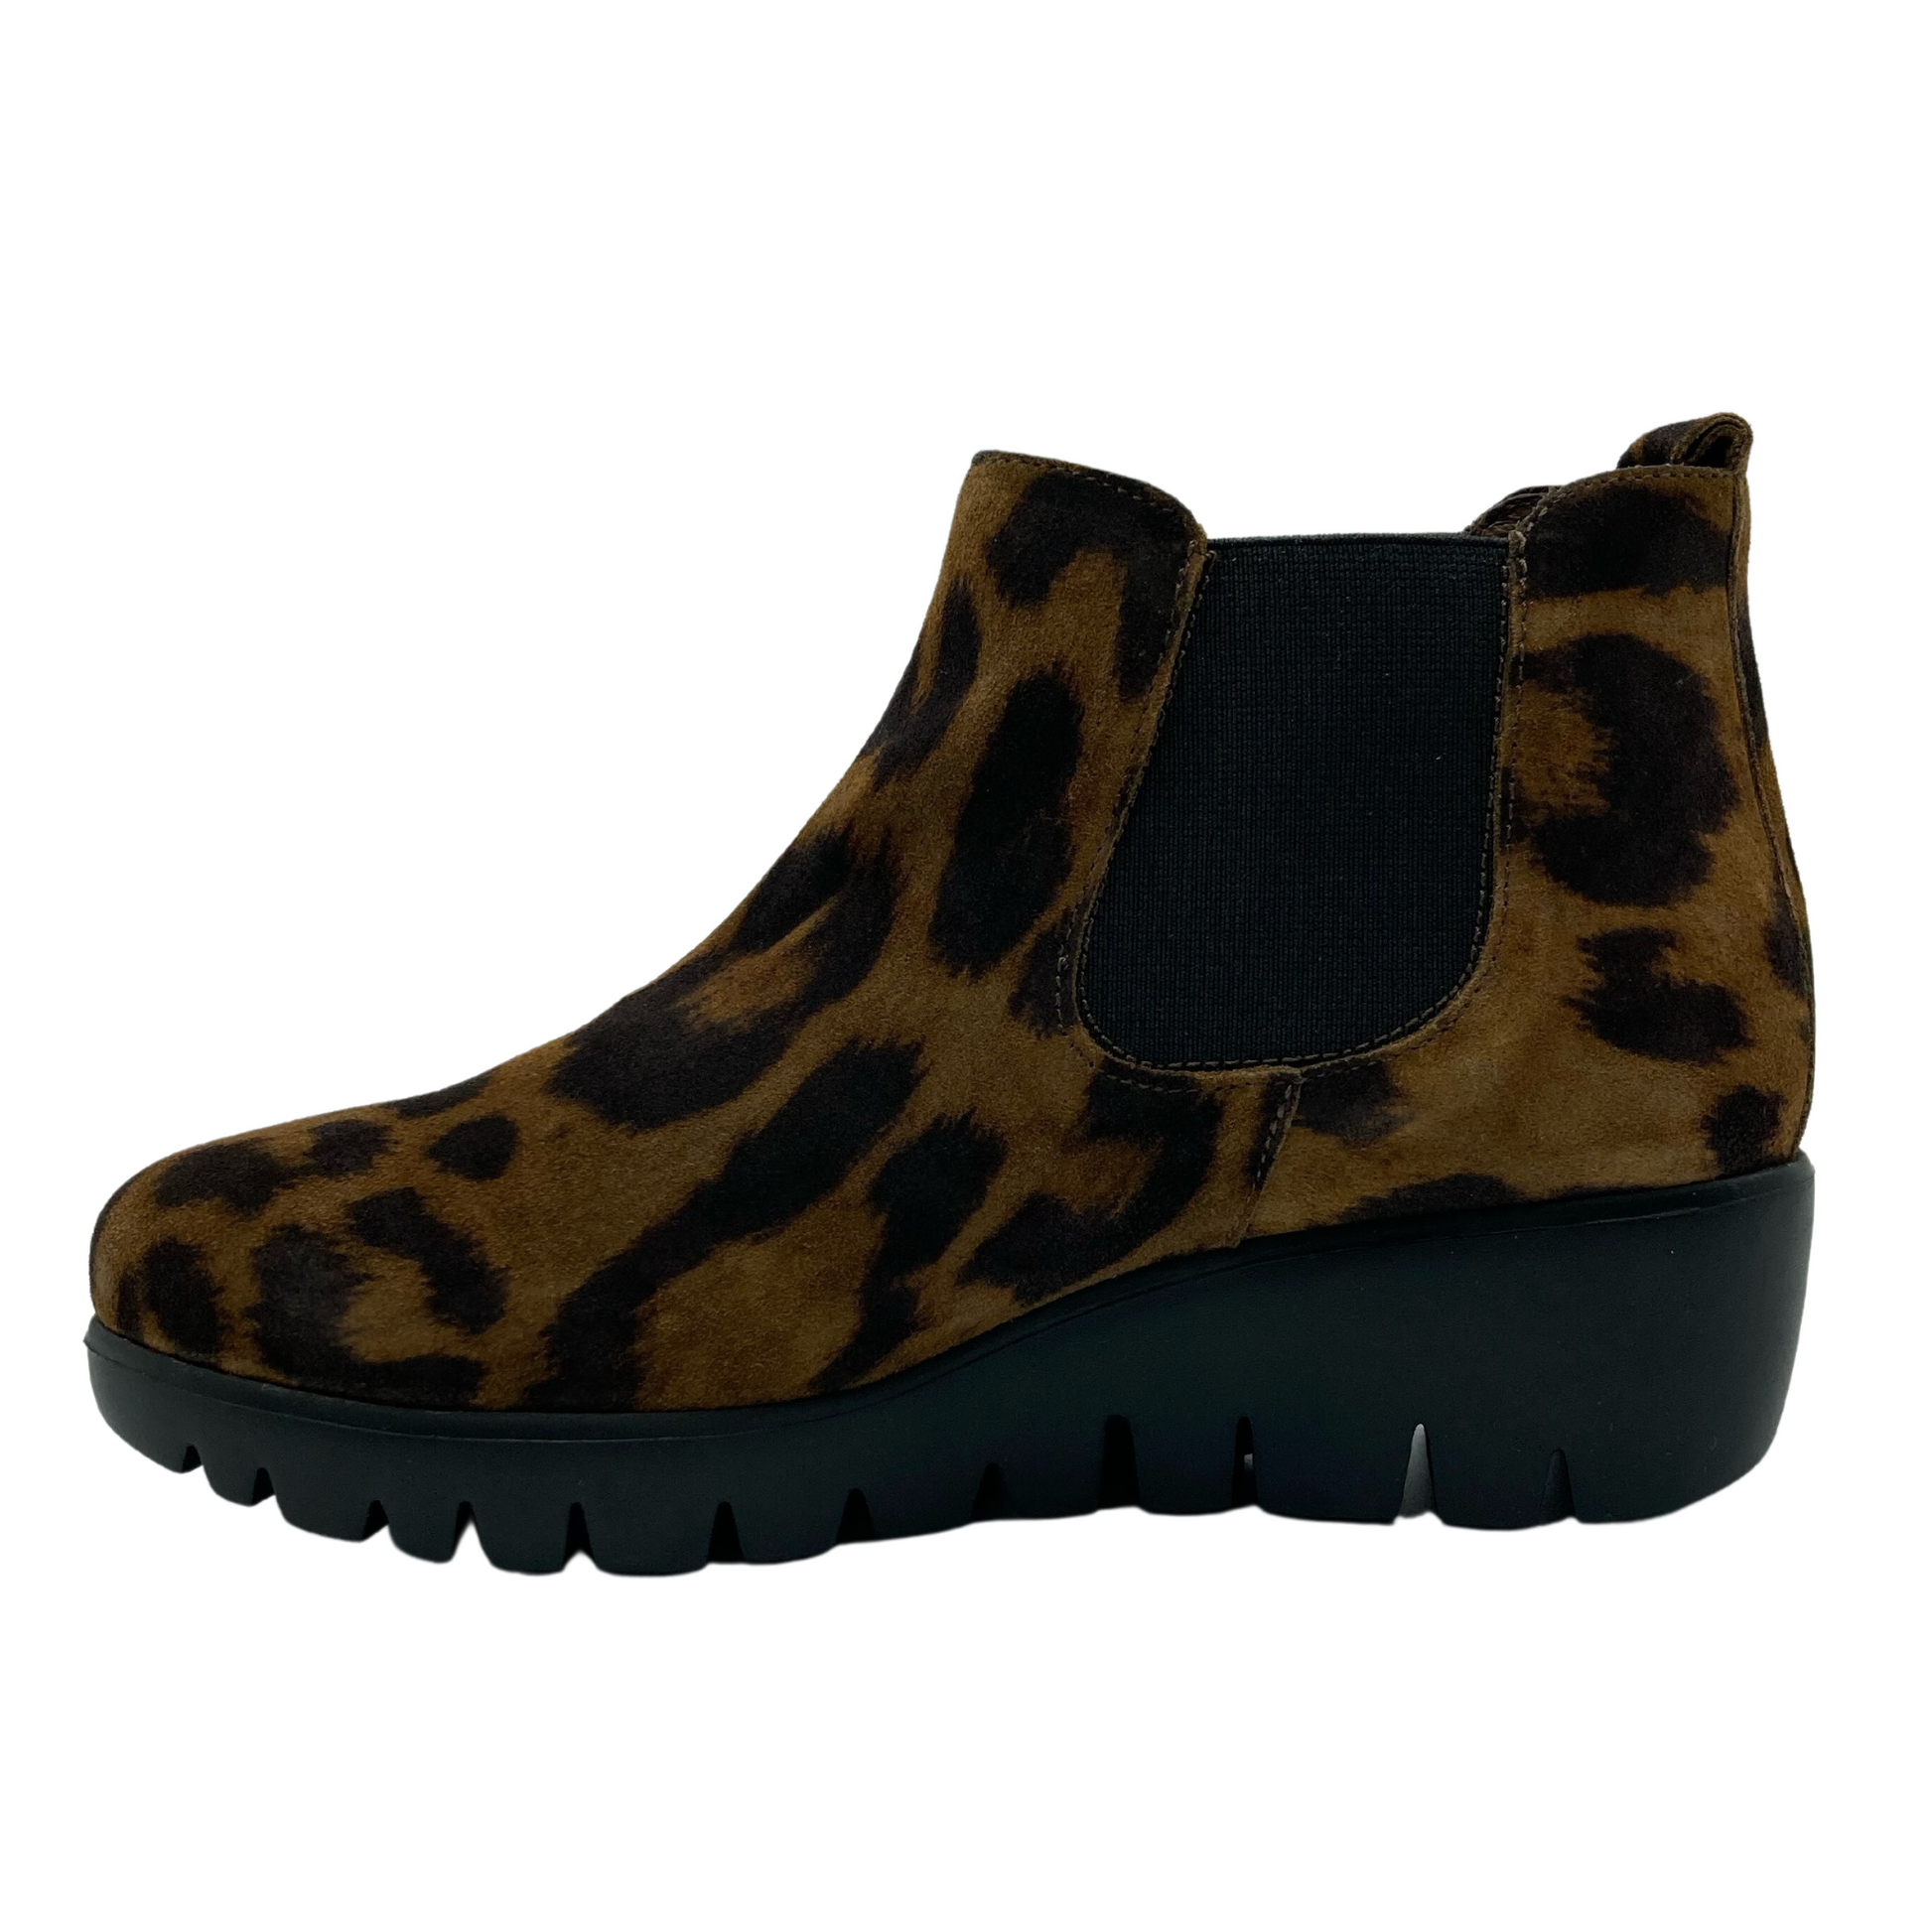 Left facing view of leopard print suede short boot with elastic side gore and black wedge heel